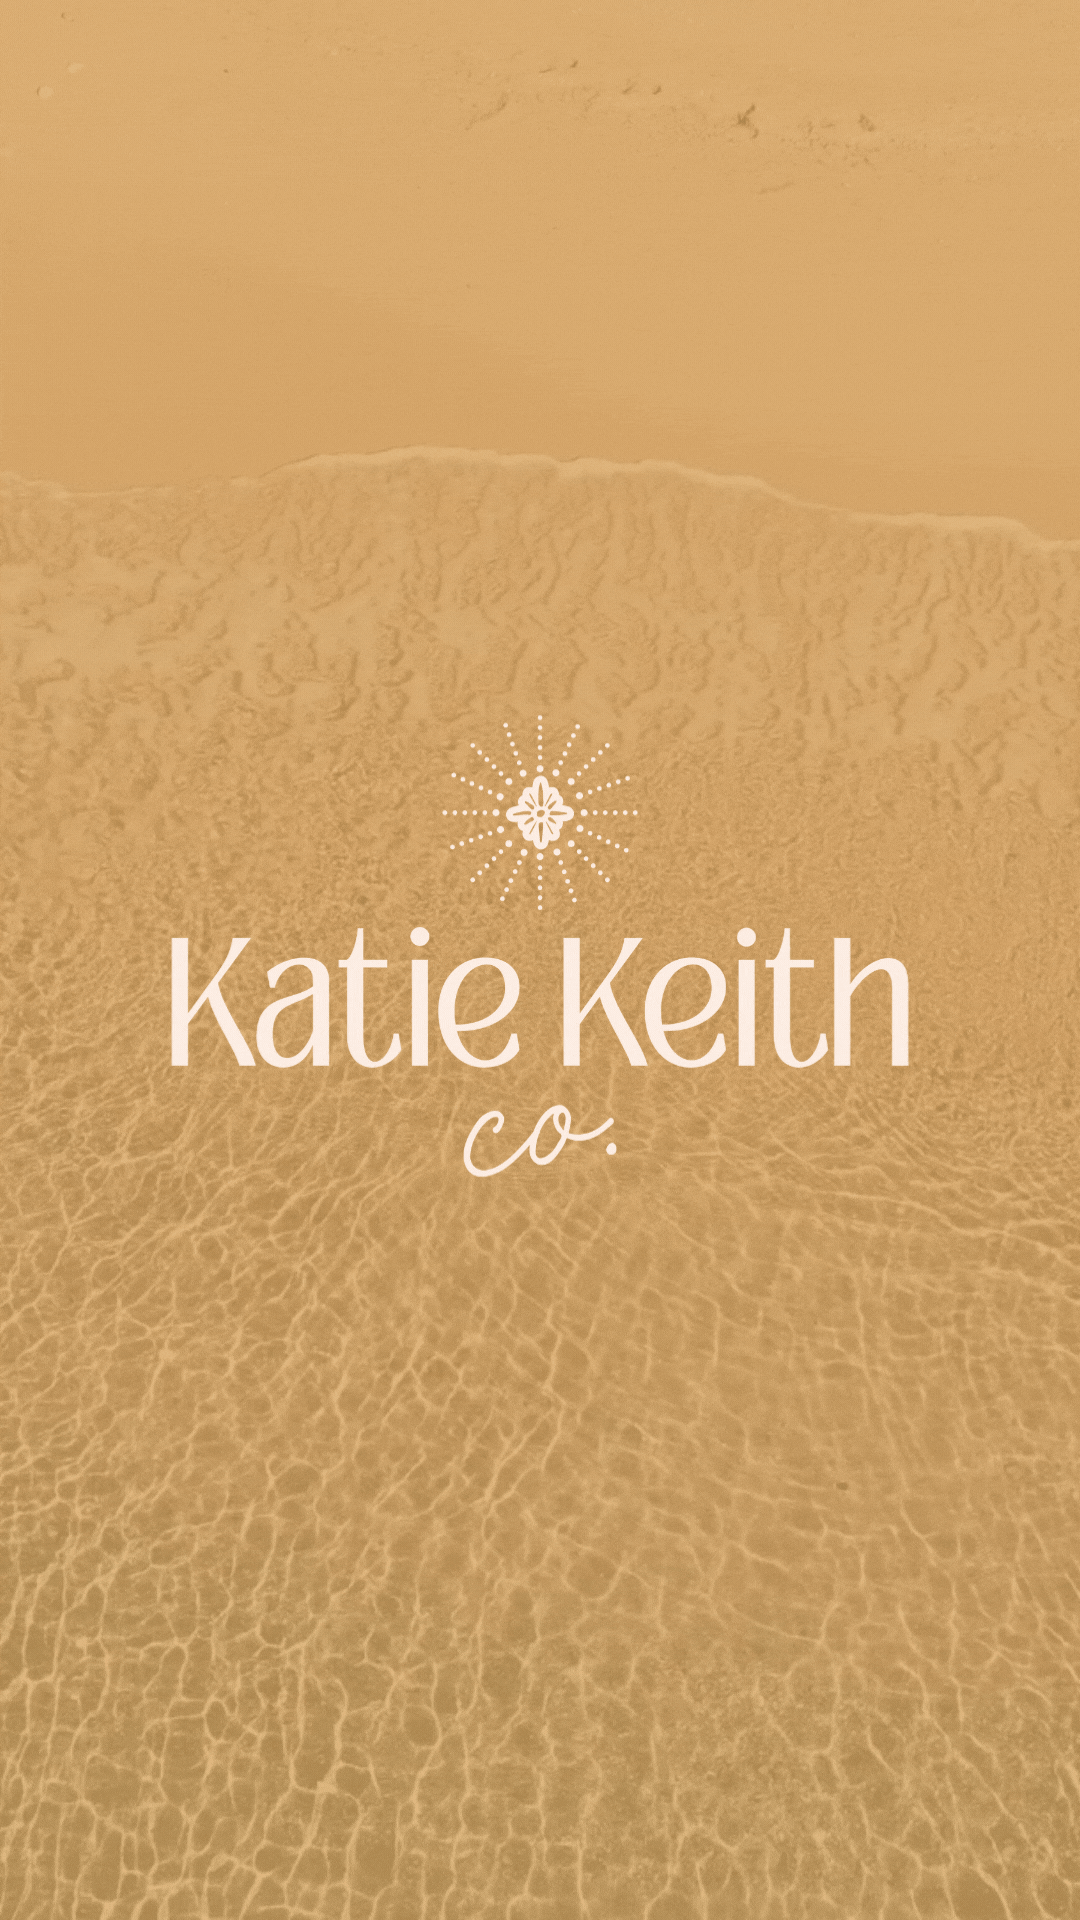 Katie Keith Co logo on a video background of waves washing up on sand